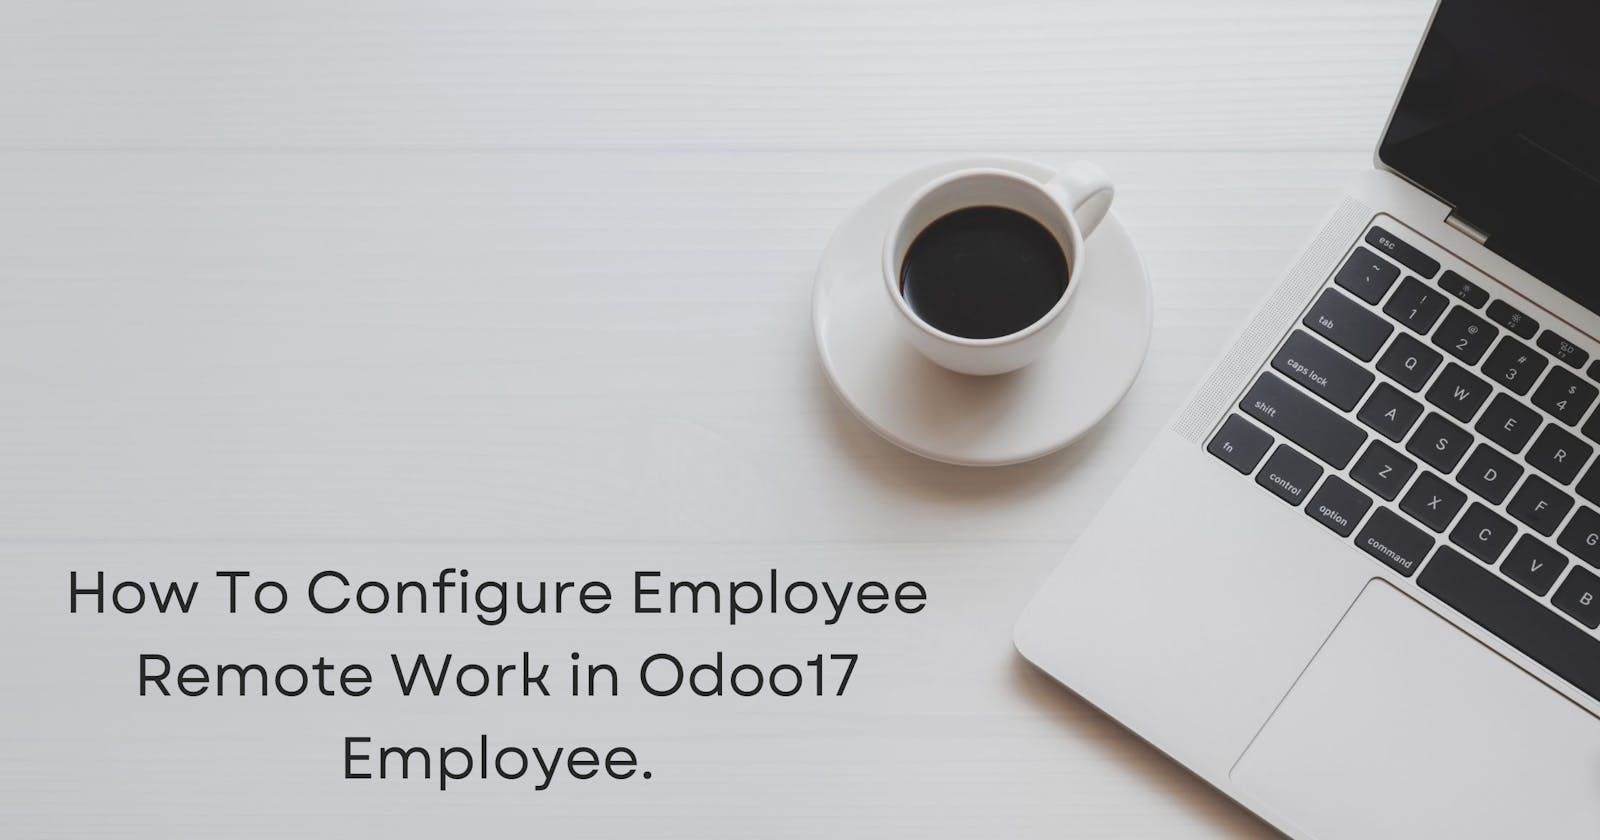 How To Configure Employee Remote Work in Odoo17.